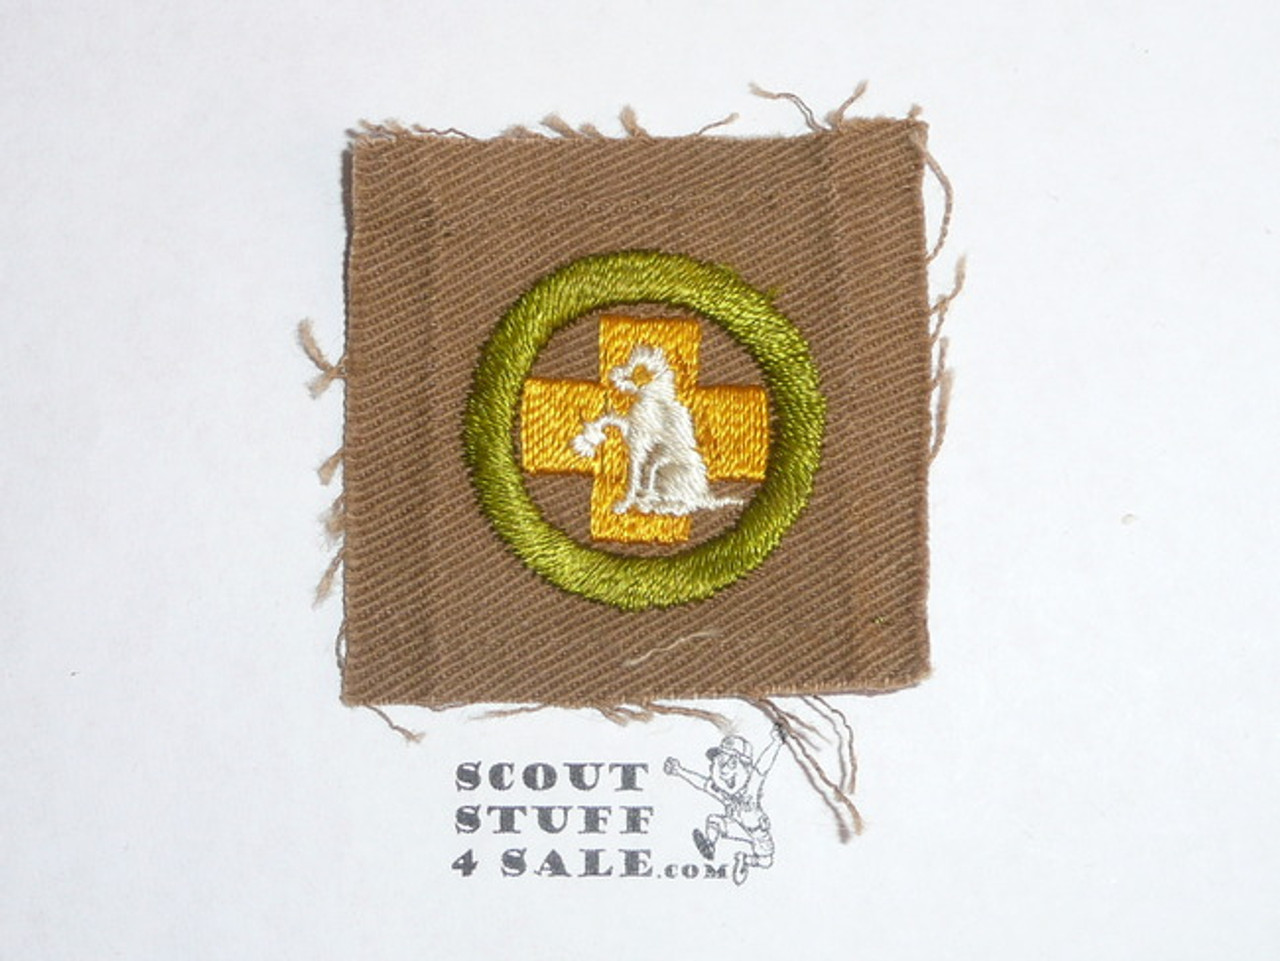 First Aid to Animals - Type A - Square Tan Merit Badge (1911-1933), lt use